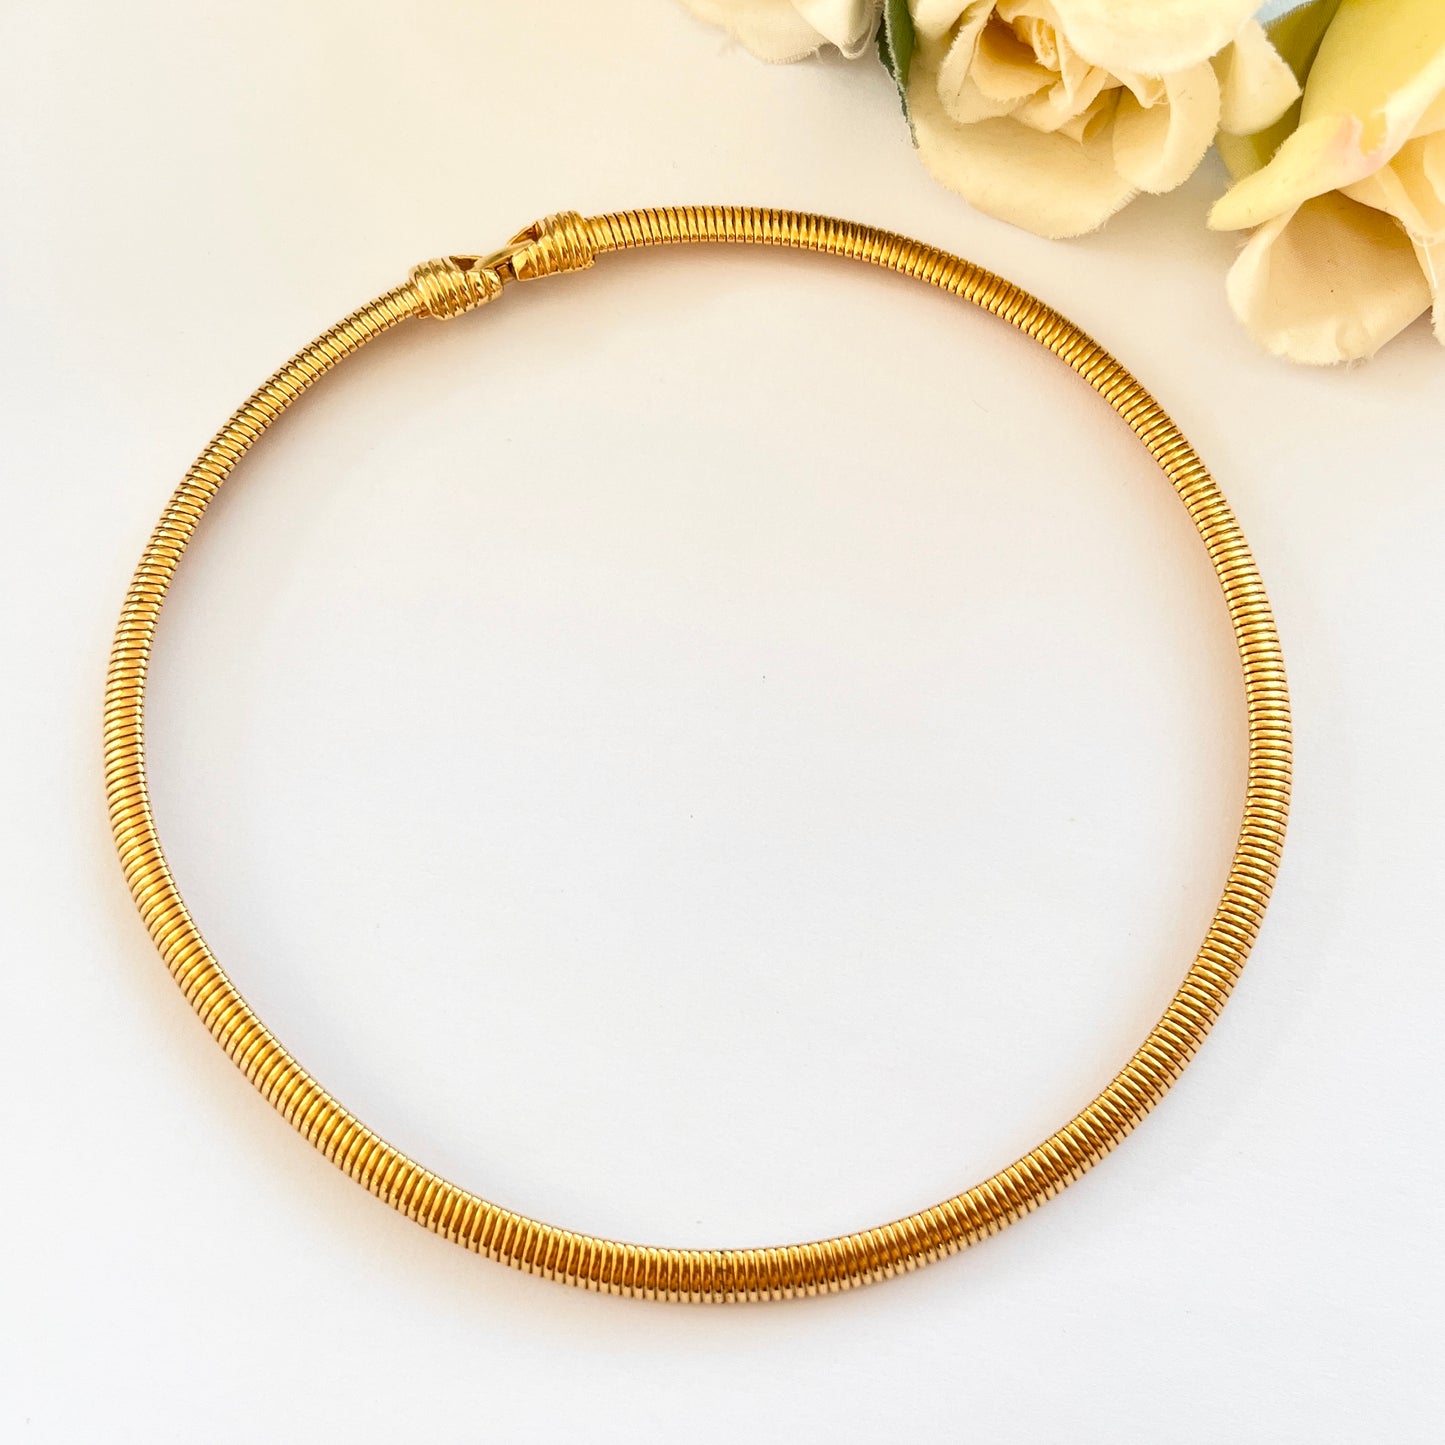 1980s Napier Gold Plated Statement Collar Necklace